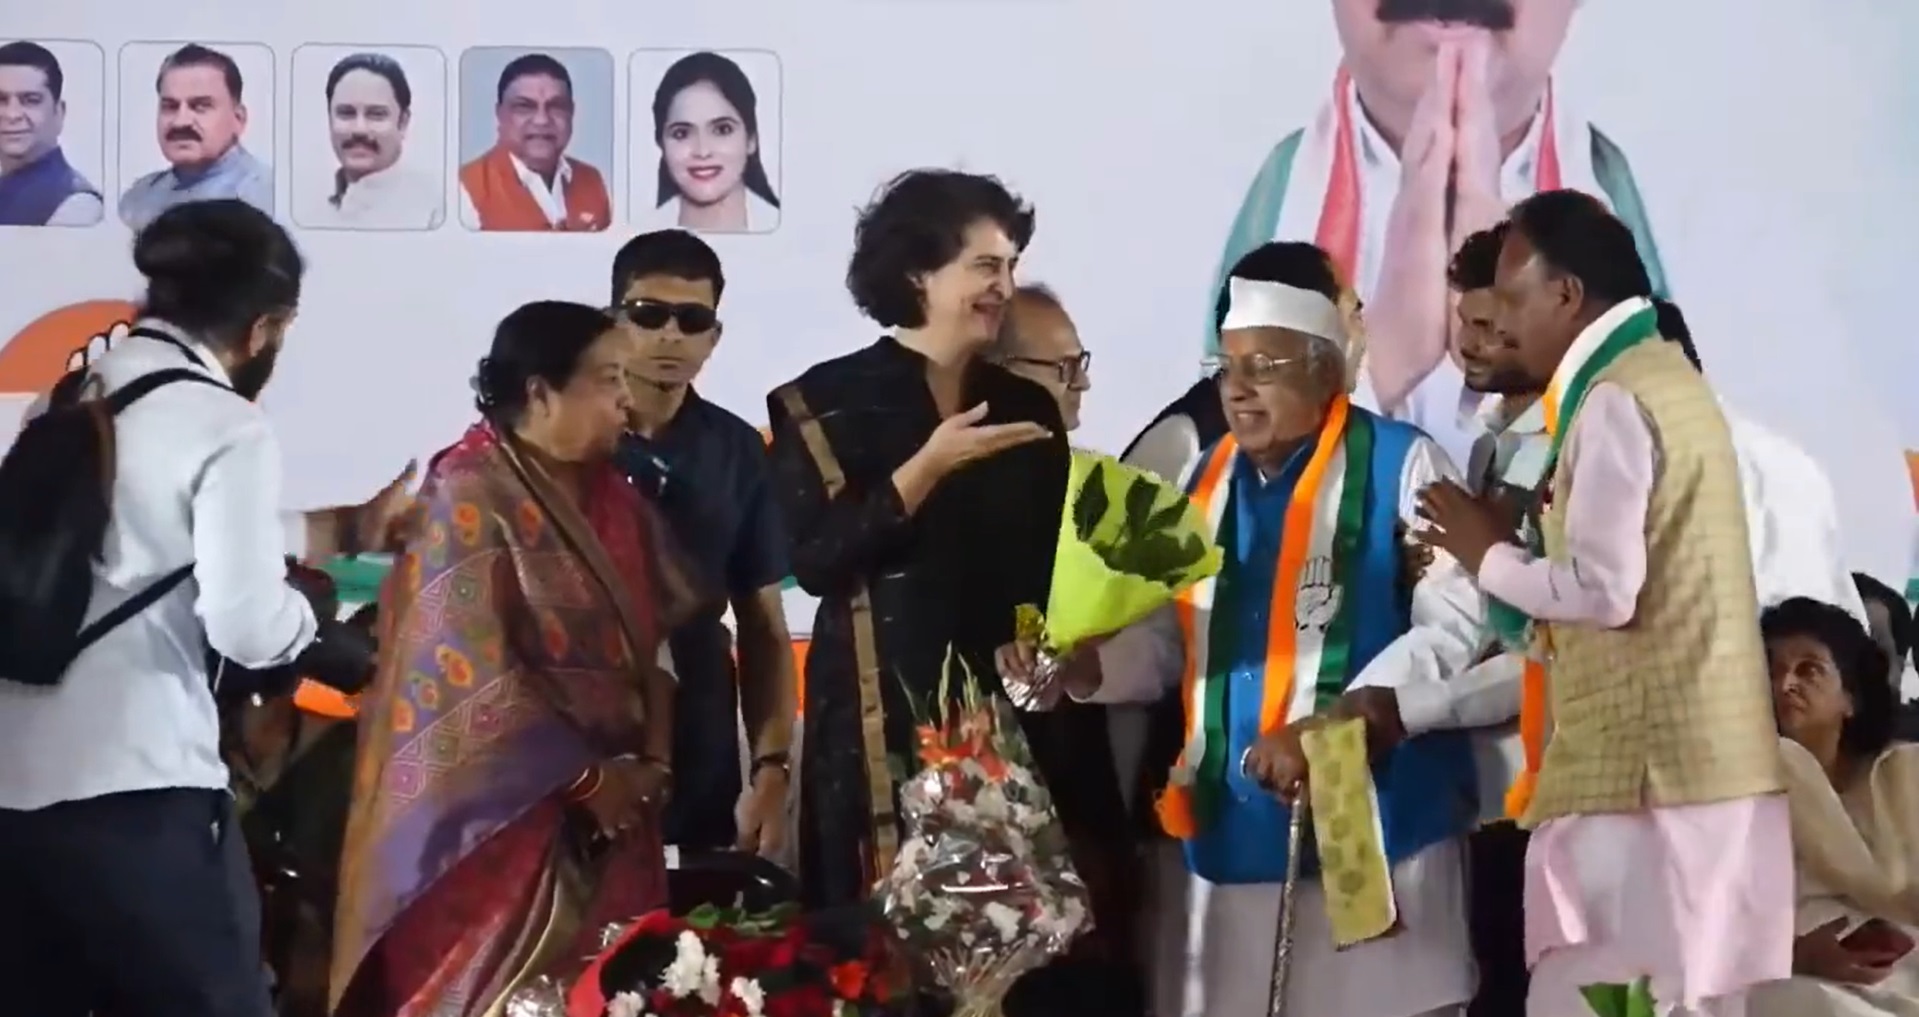 Priyanka Gandhi Vadra’s Hilarious Bouquet Moment at Indore Rally Goes Viral